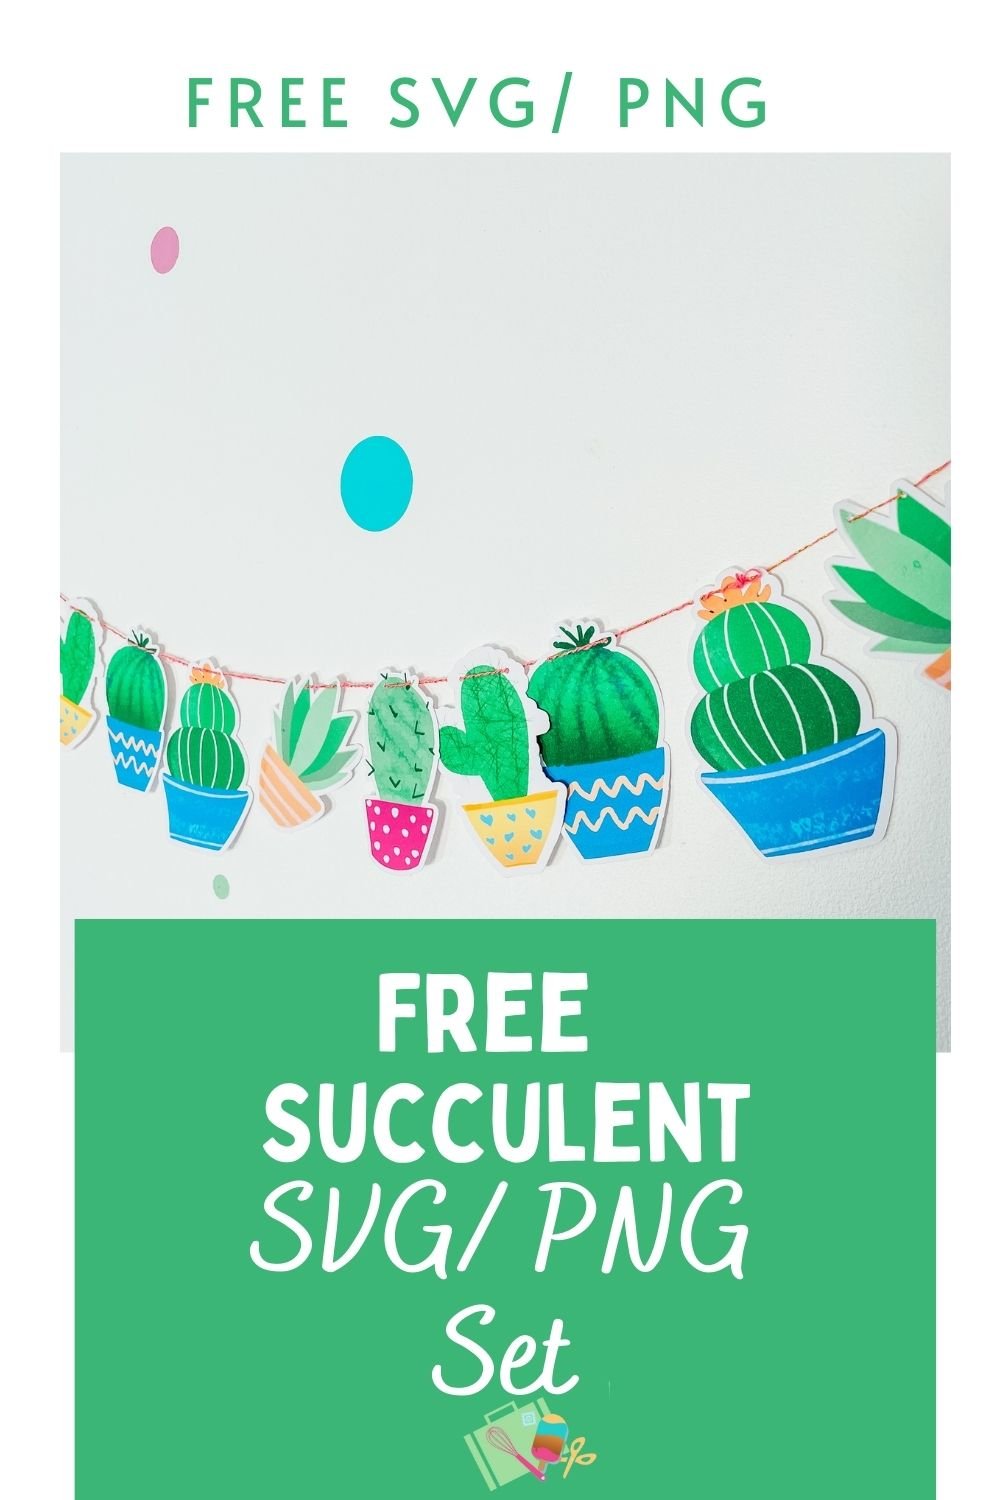 Free Cricut Cactus and succulent SVG File for crafting-3